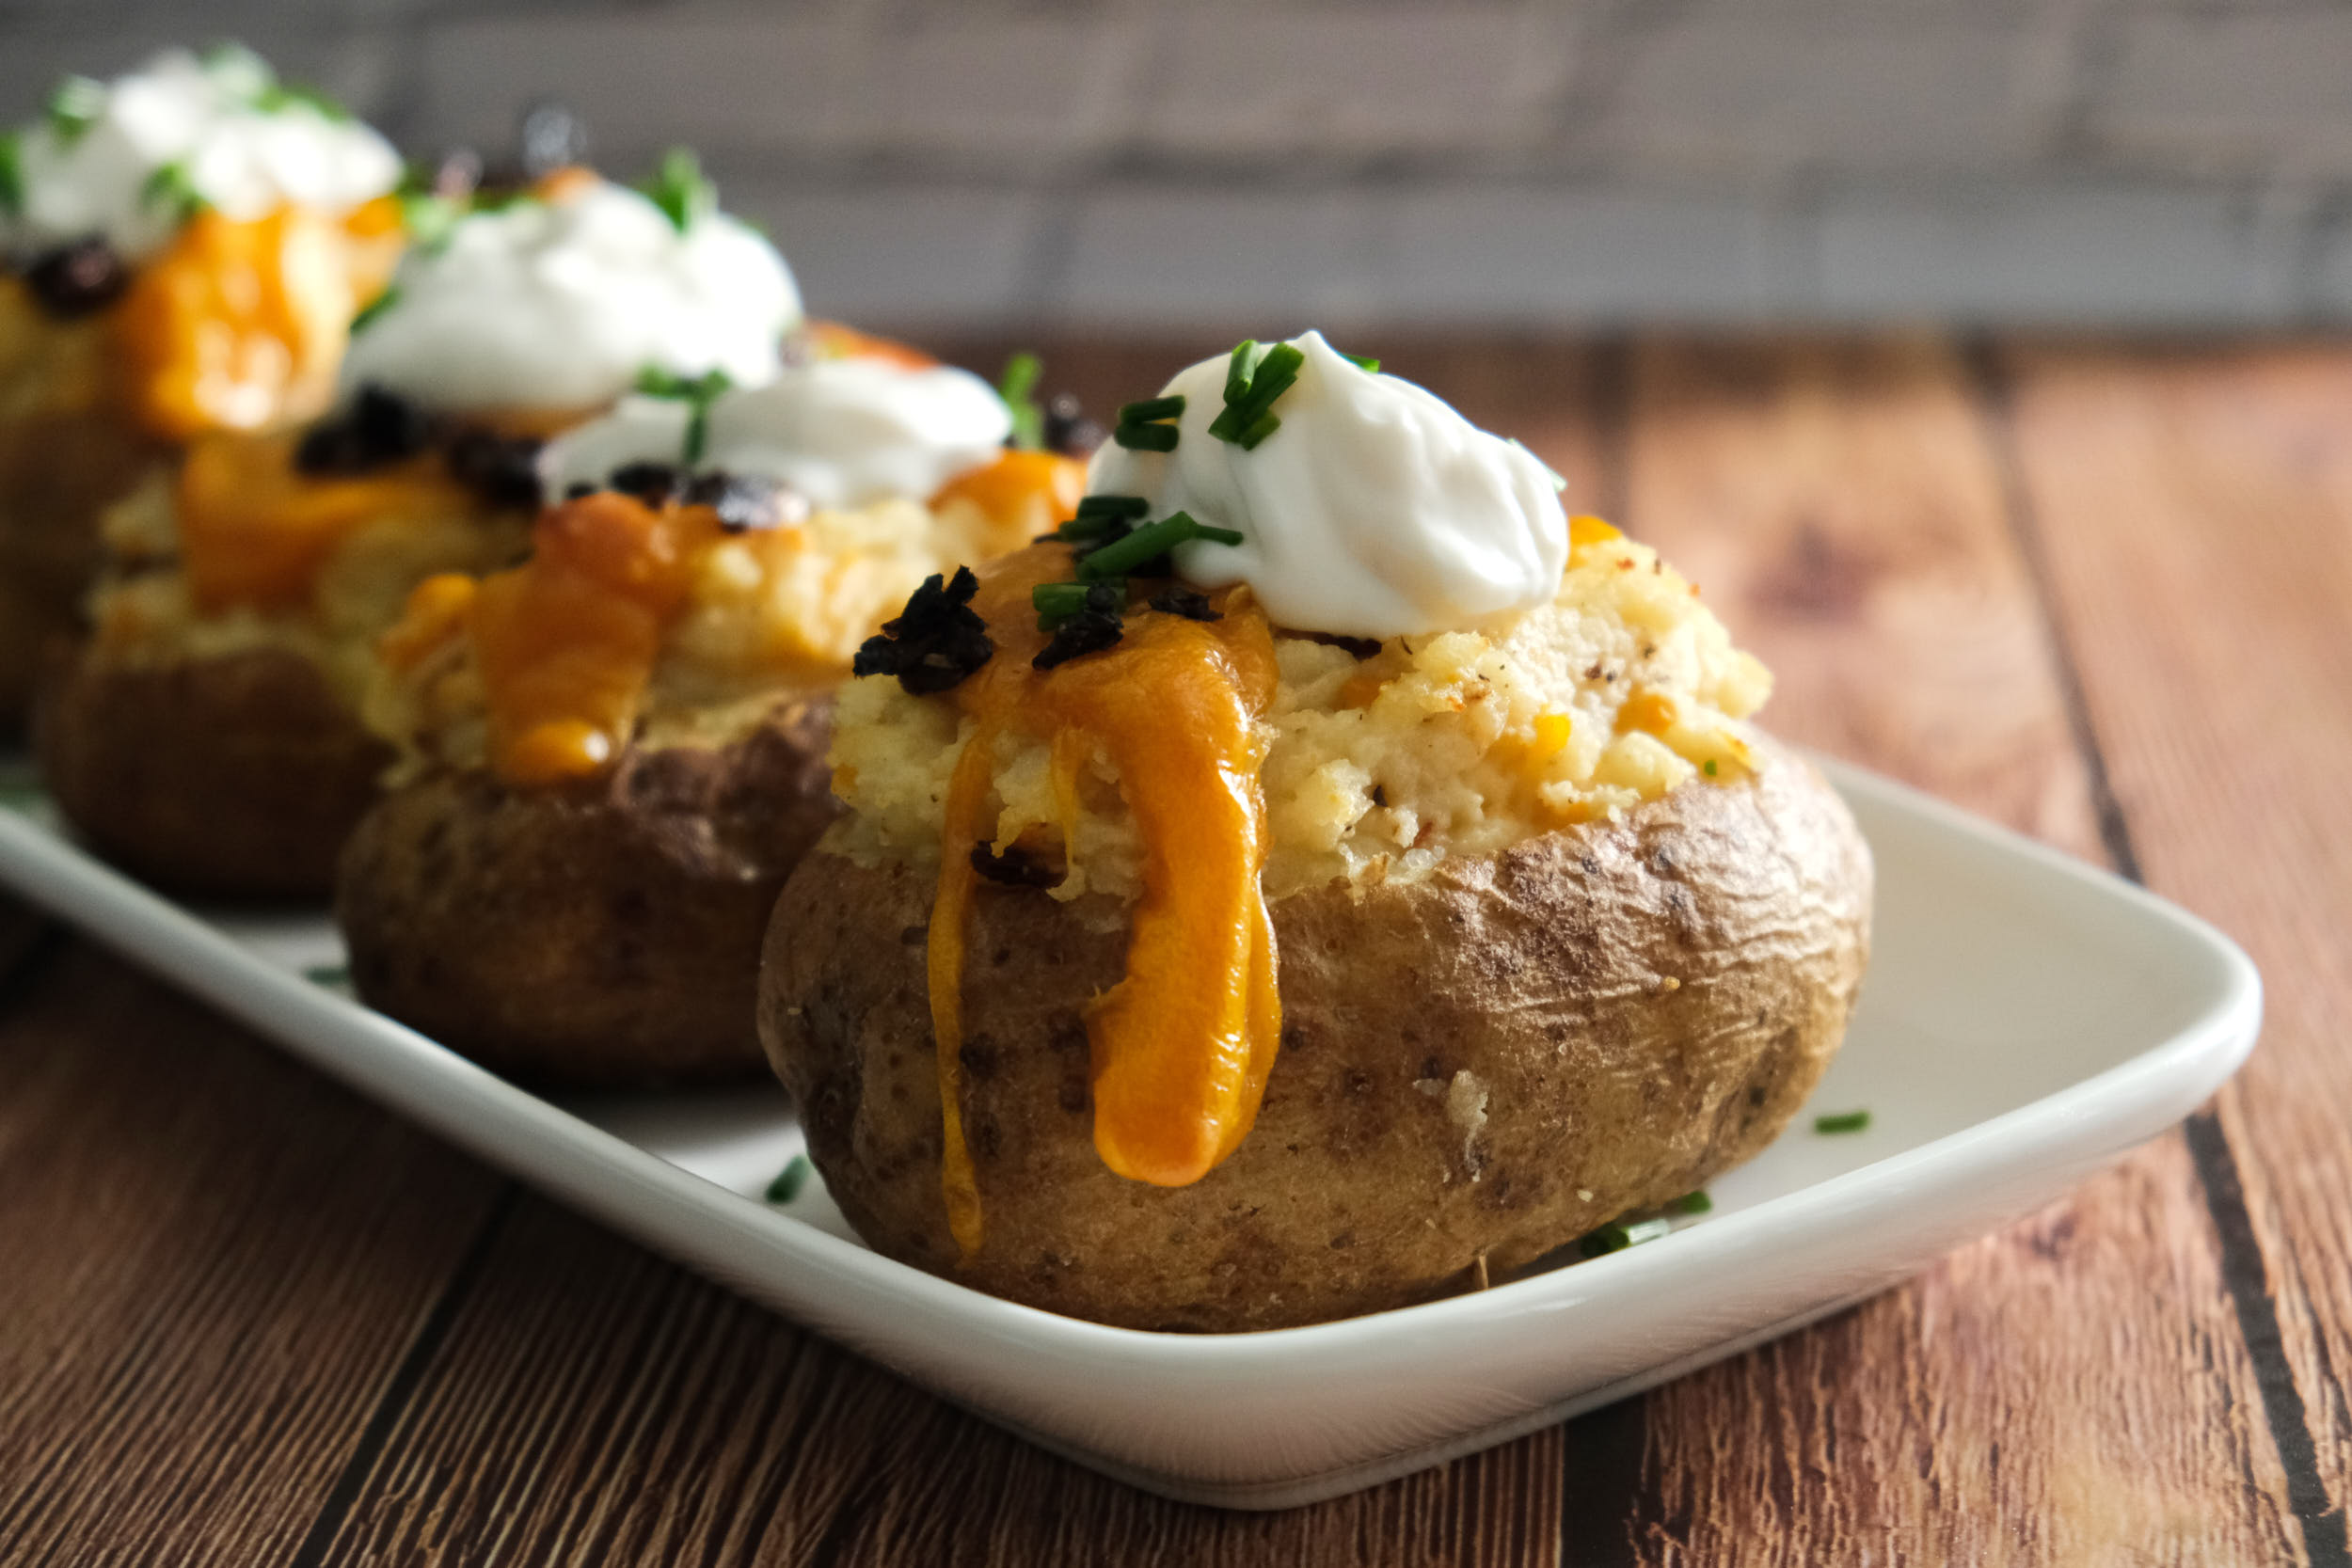 https://images.ctfassets.net/092wi7ilt2cf/7zO522f9DcHwIUDSI37xKo/5dffb675a916c69ce7aad1b240664bf2/close-up-loaded-baked-potato-with-dripping-cheese.jpg